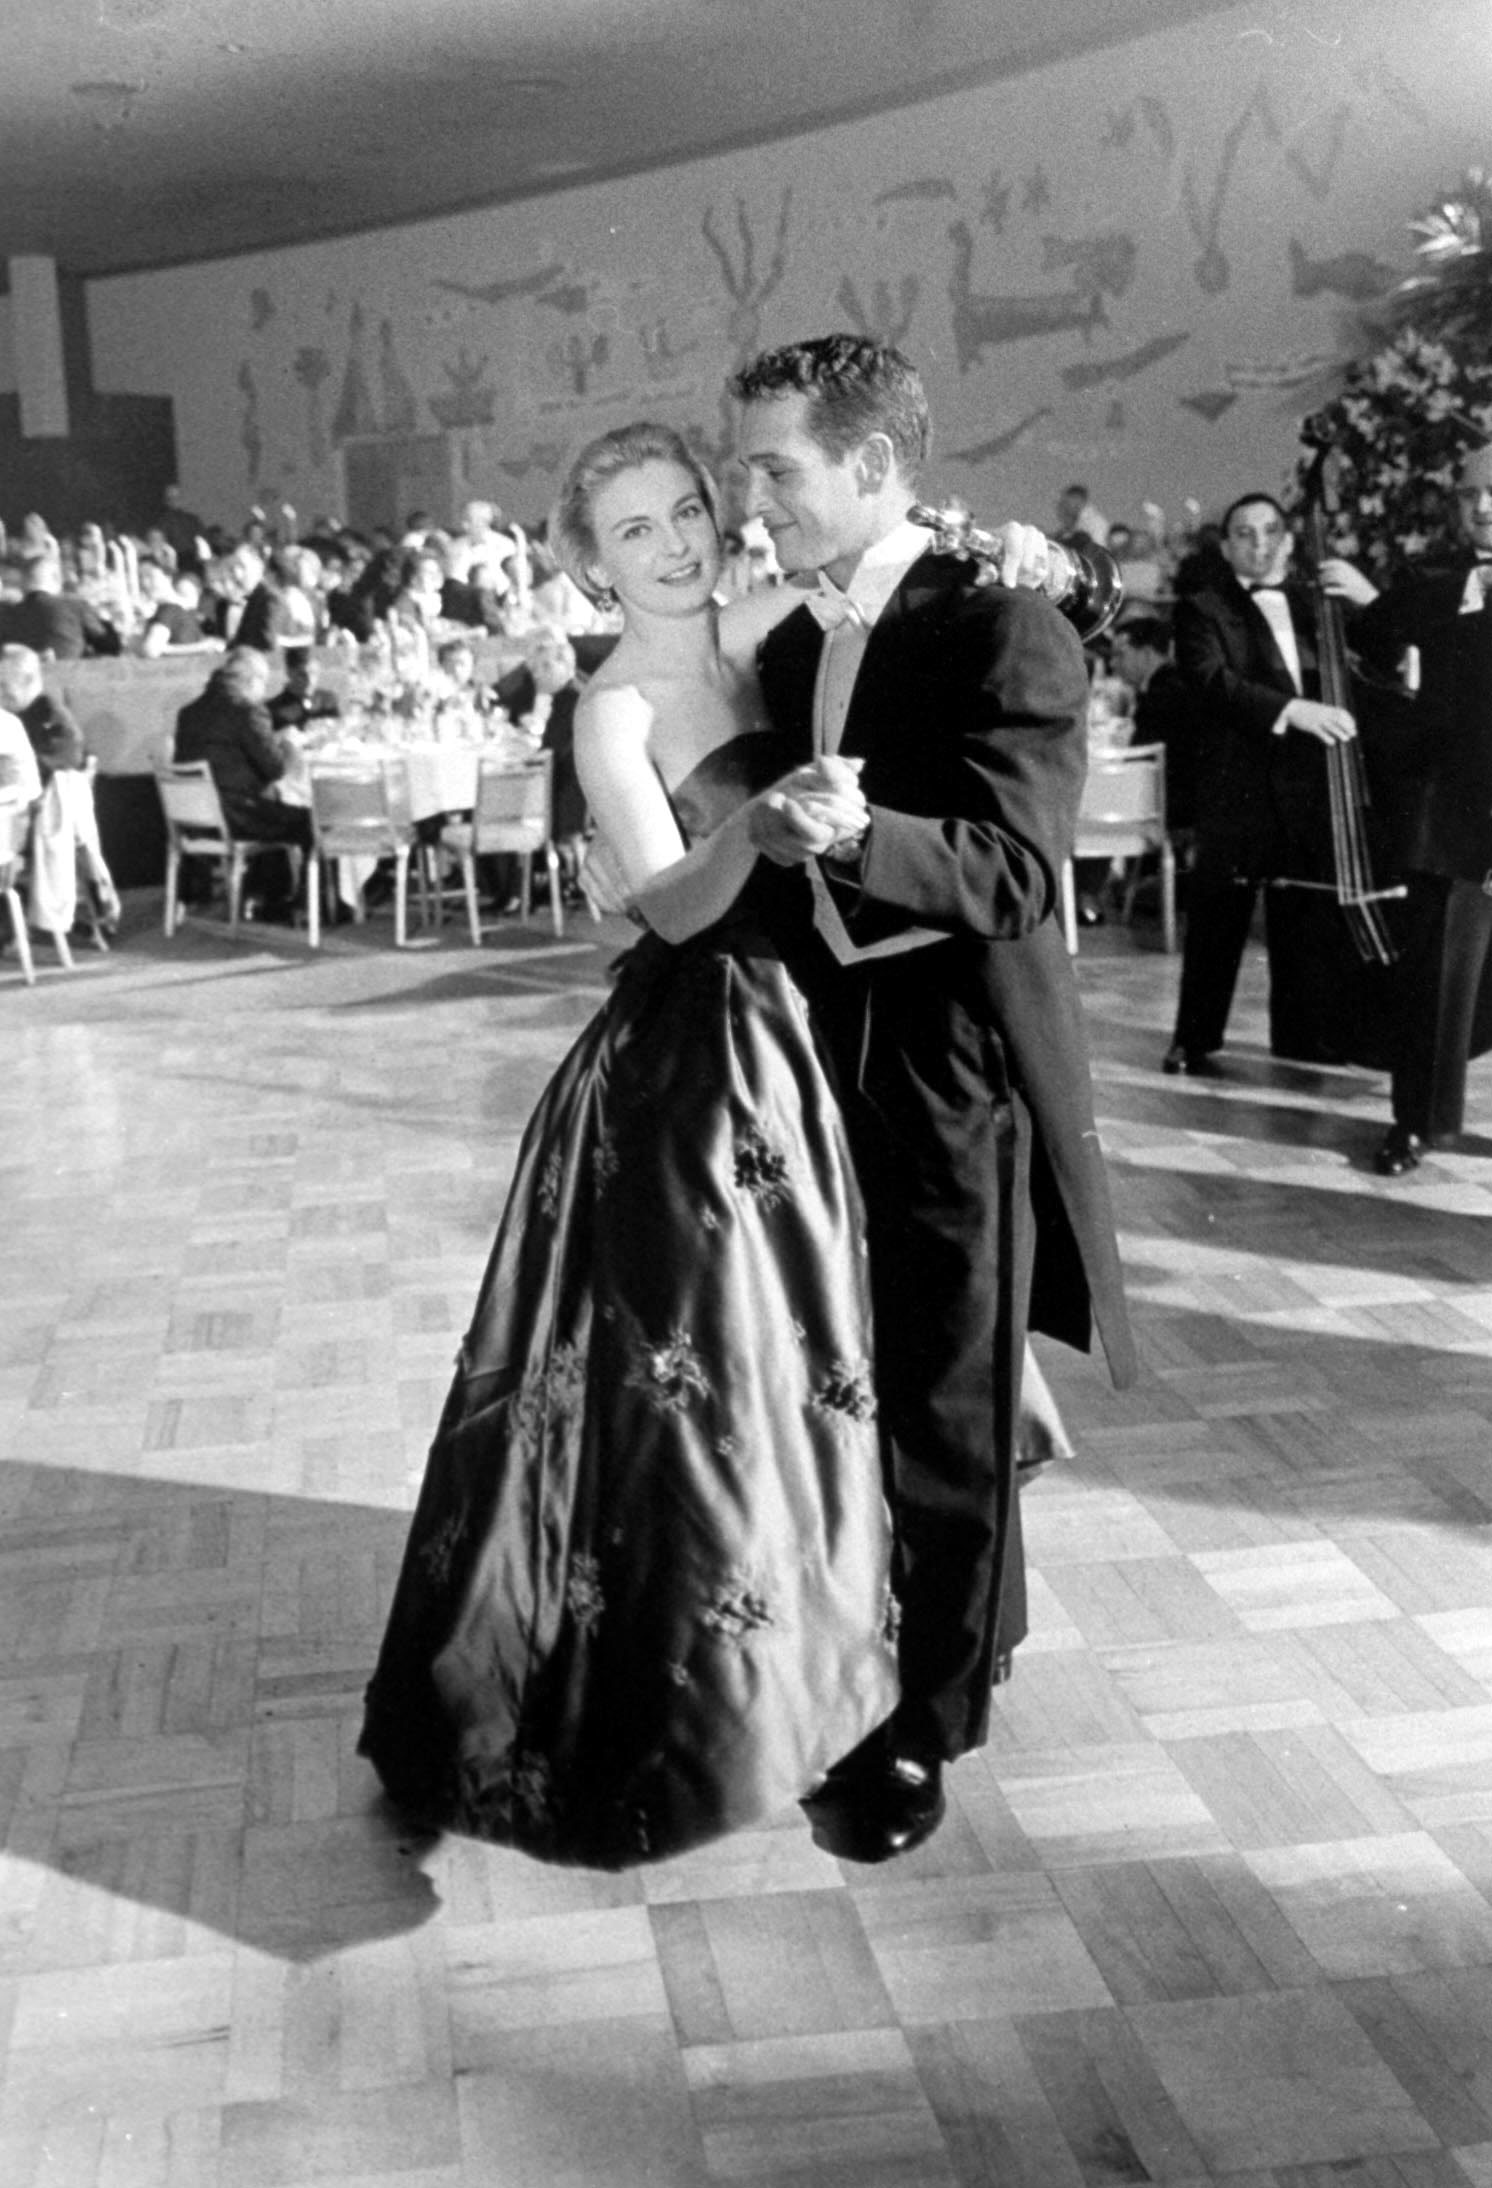 Joanne Woodward dances with her husband, Paul Newman, at the Governor's Ball following the Academy Awards where she won the Oscar for Best Actress in Three Faces of Eve